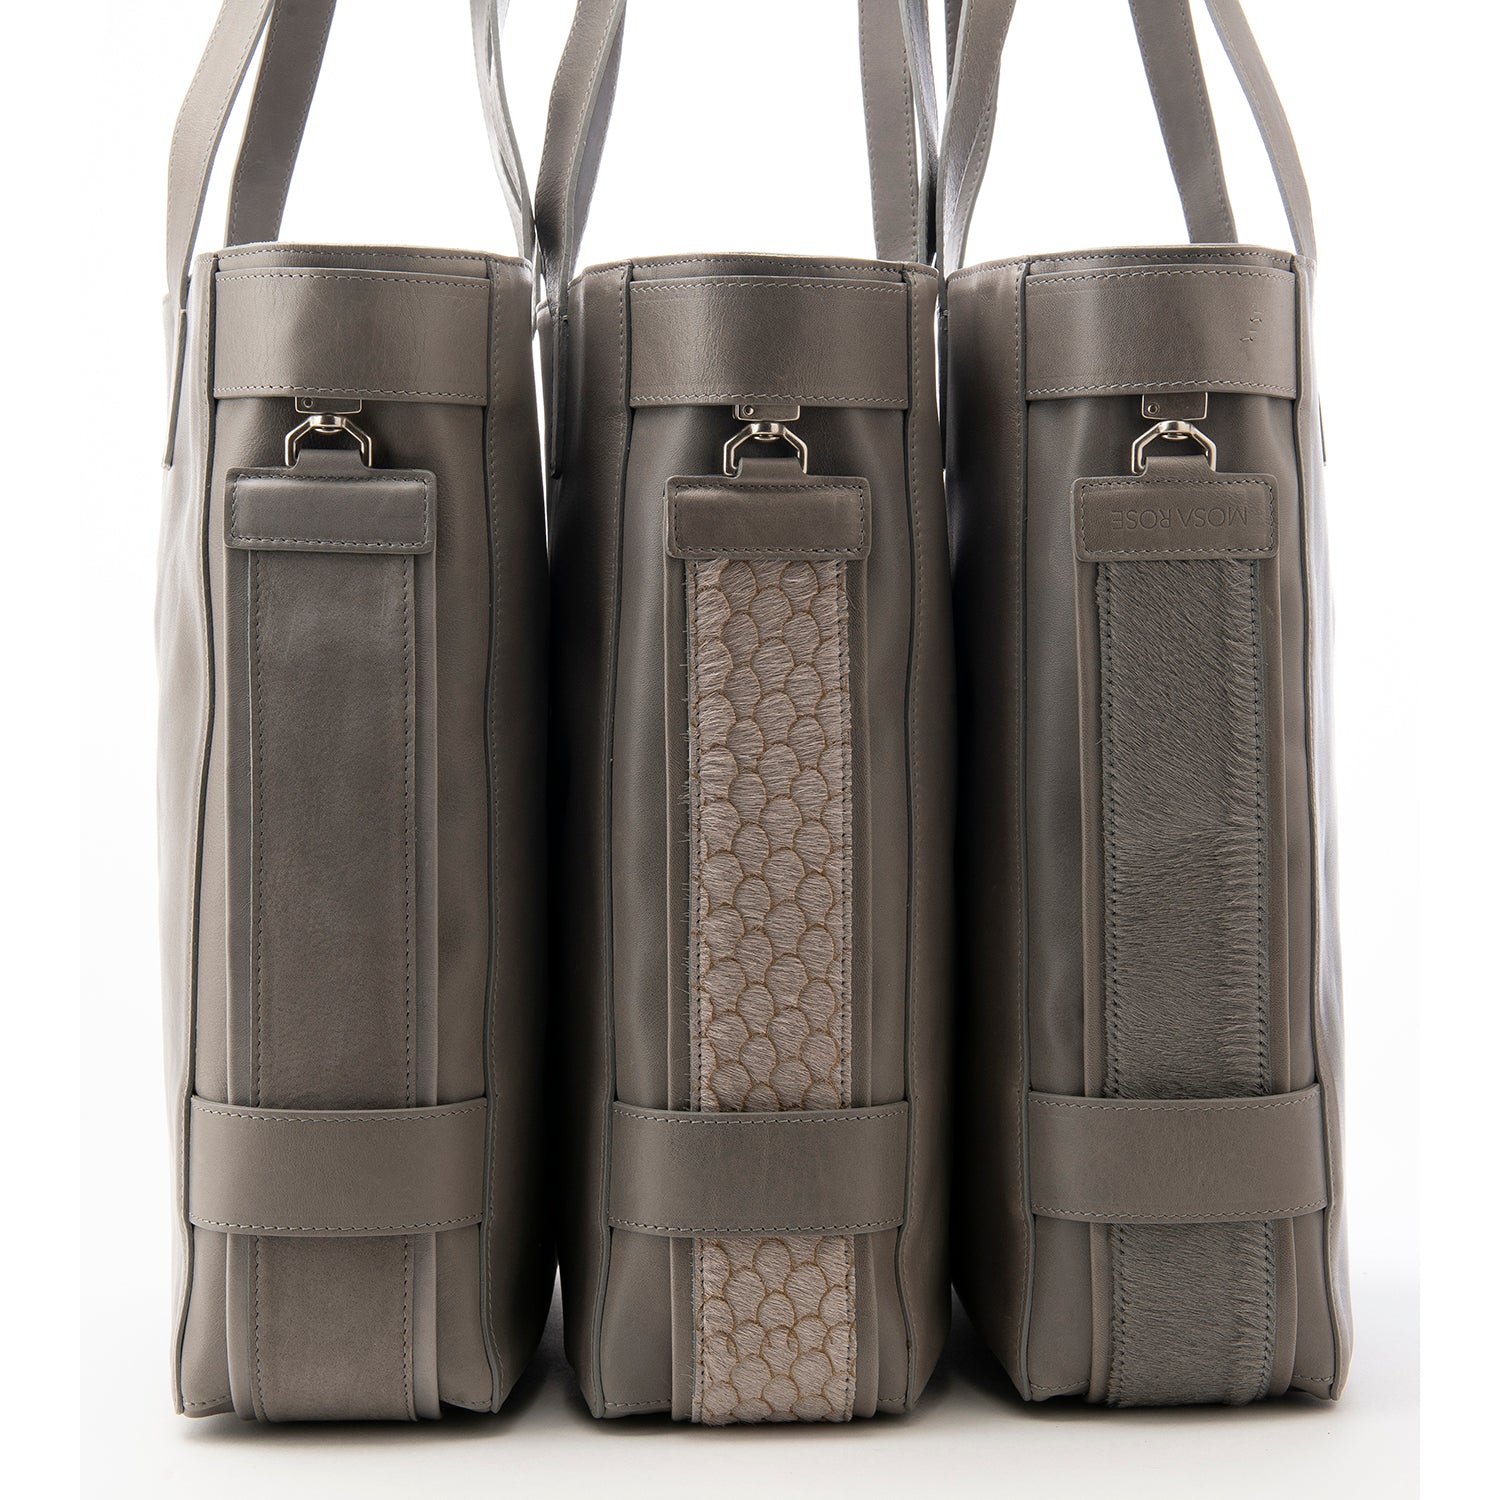 Grey Leather Terra Tote